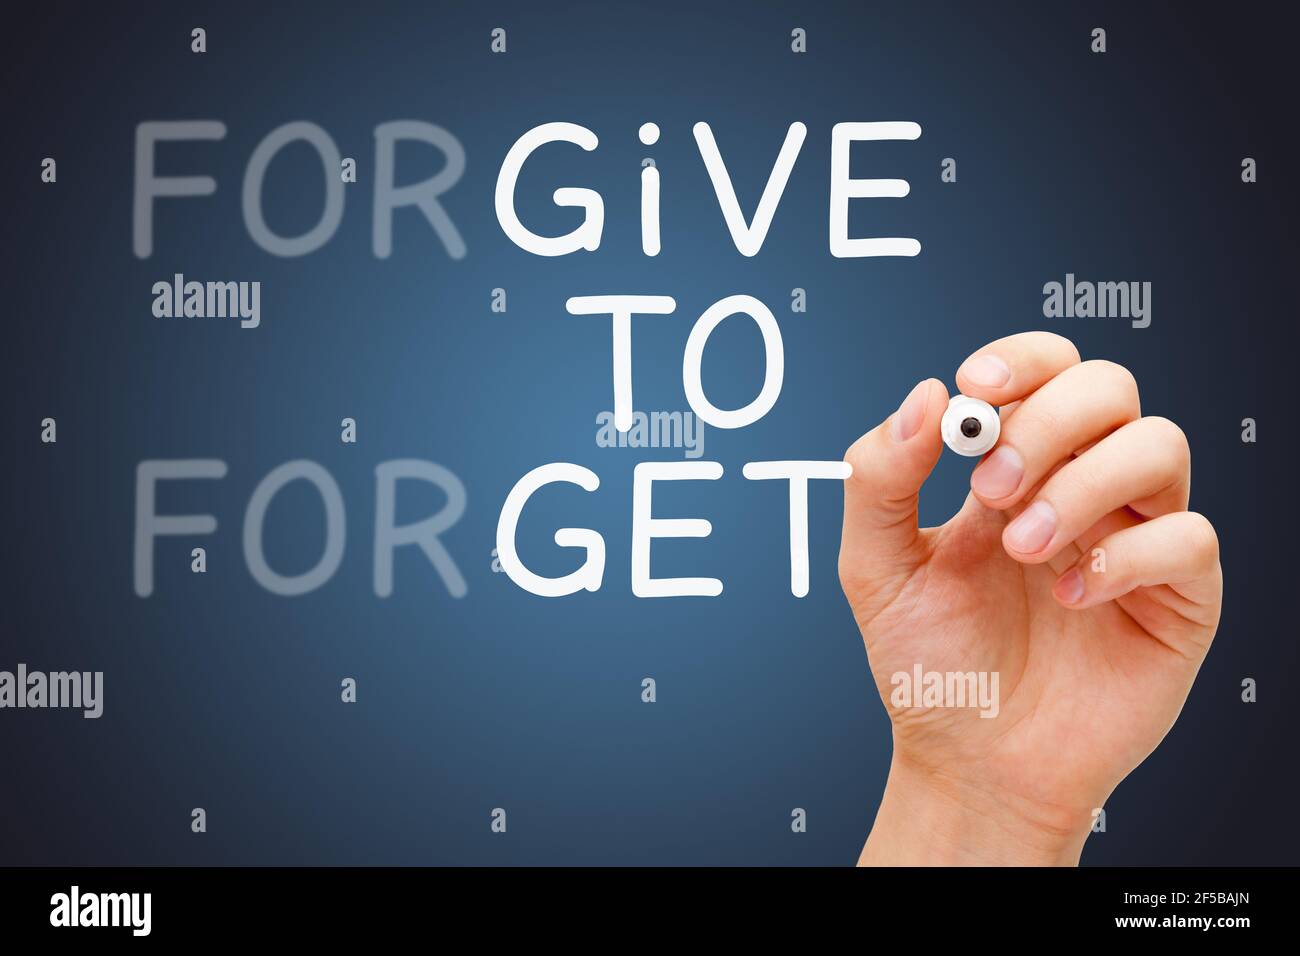 Hand writing with marker Forgive to Forget, Give to Get forgiveness concept. Stock Photo